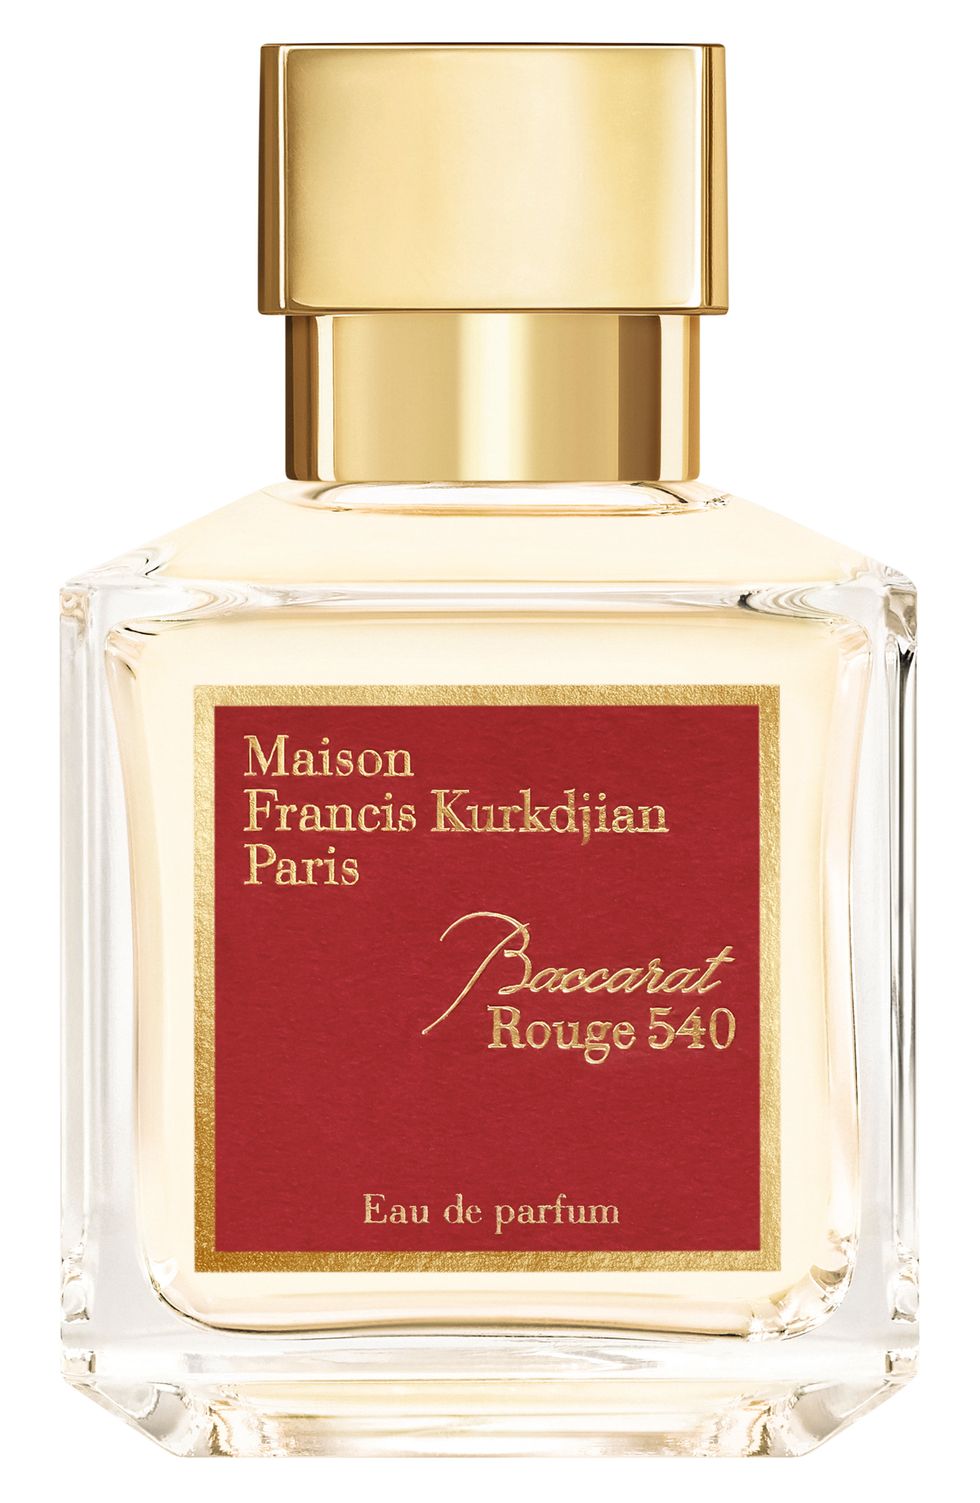 15 Indulgent Louis Vuitton Perfumes For a New Signature Scent in